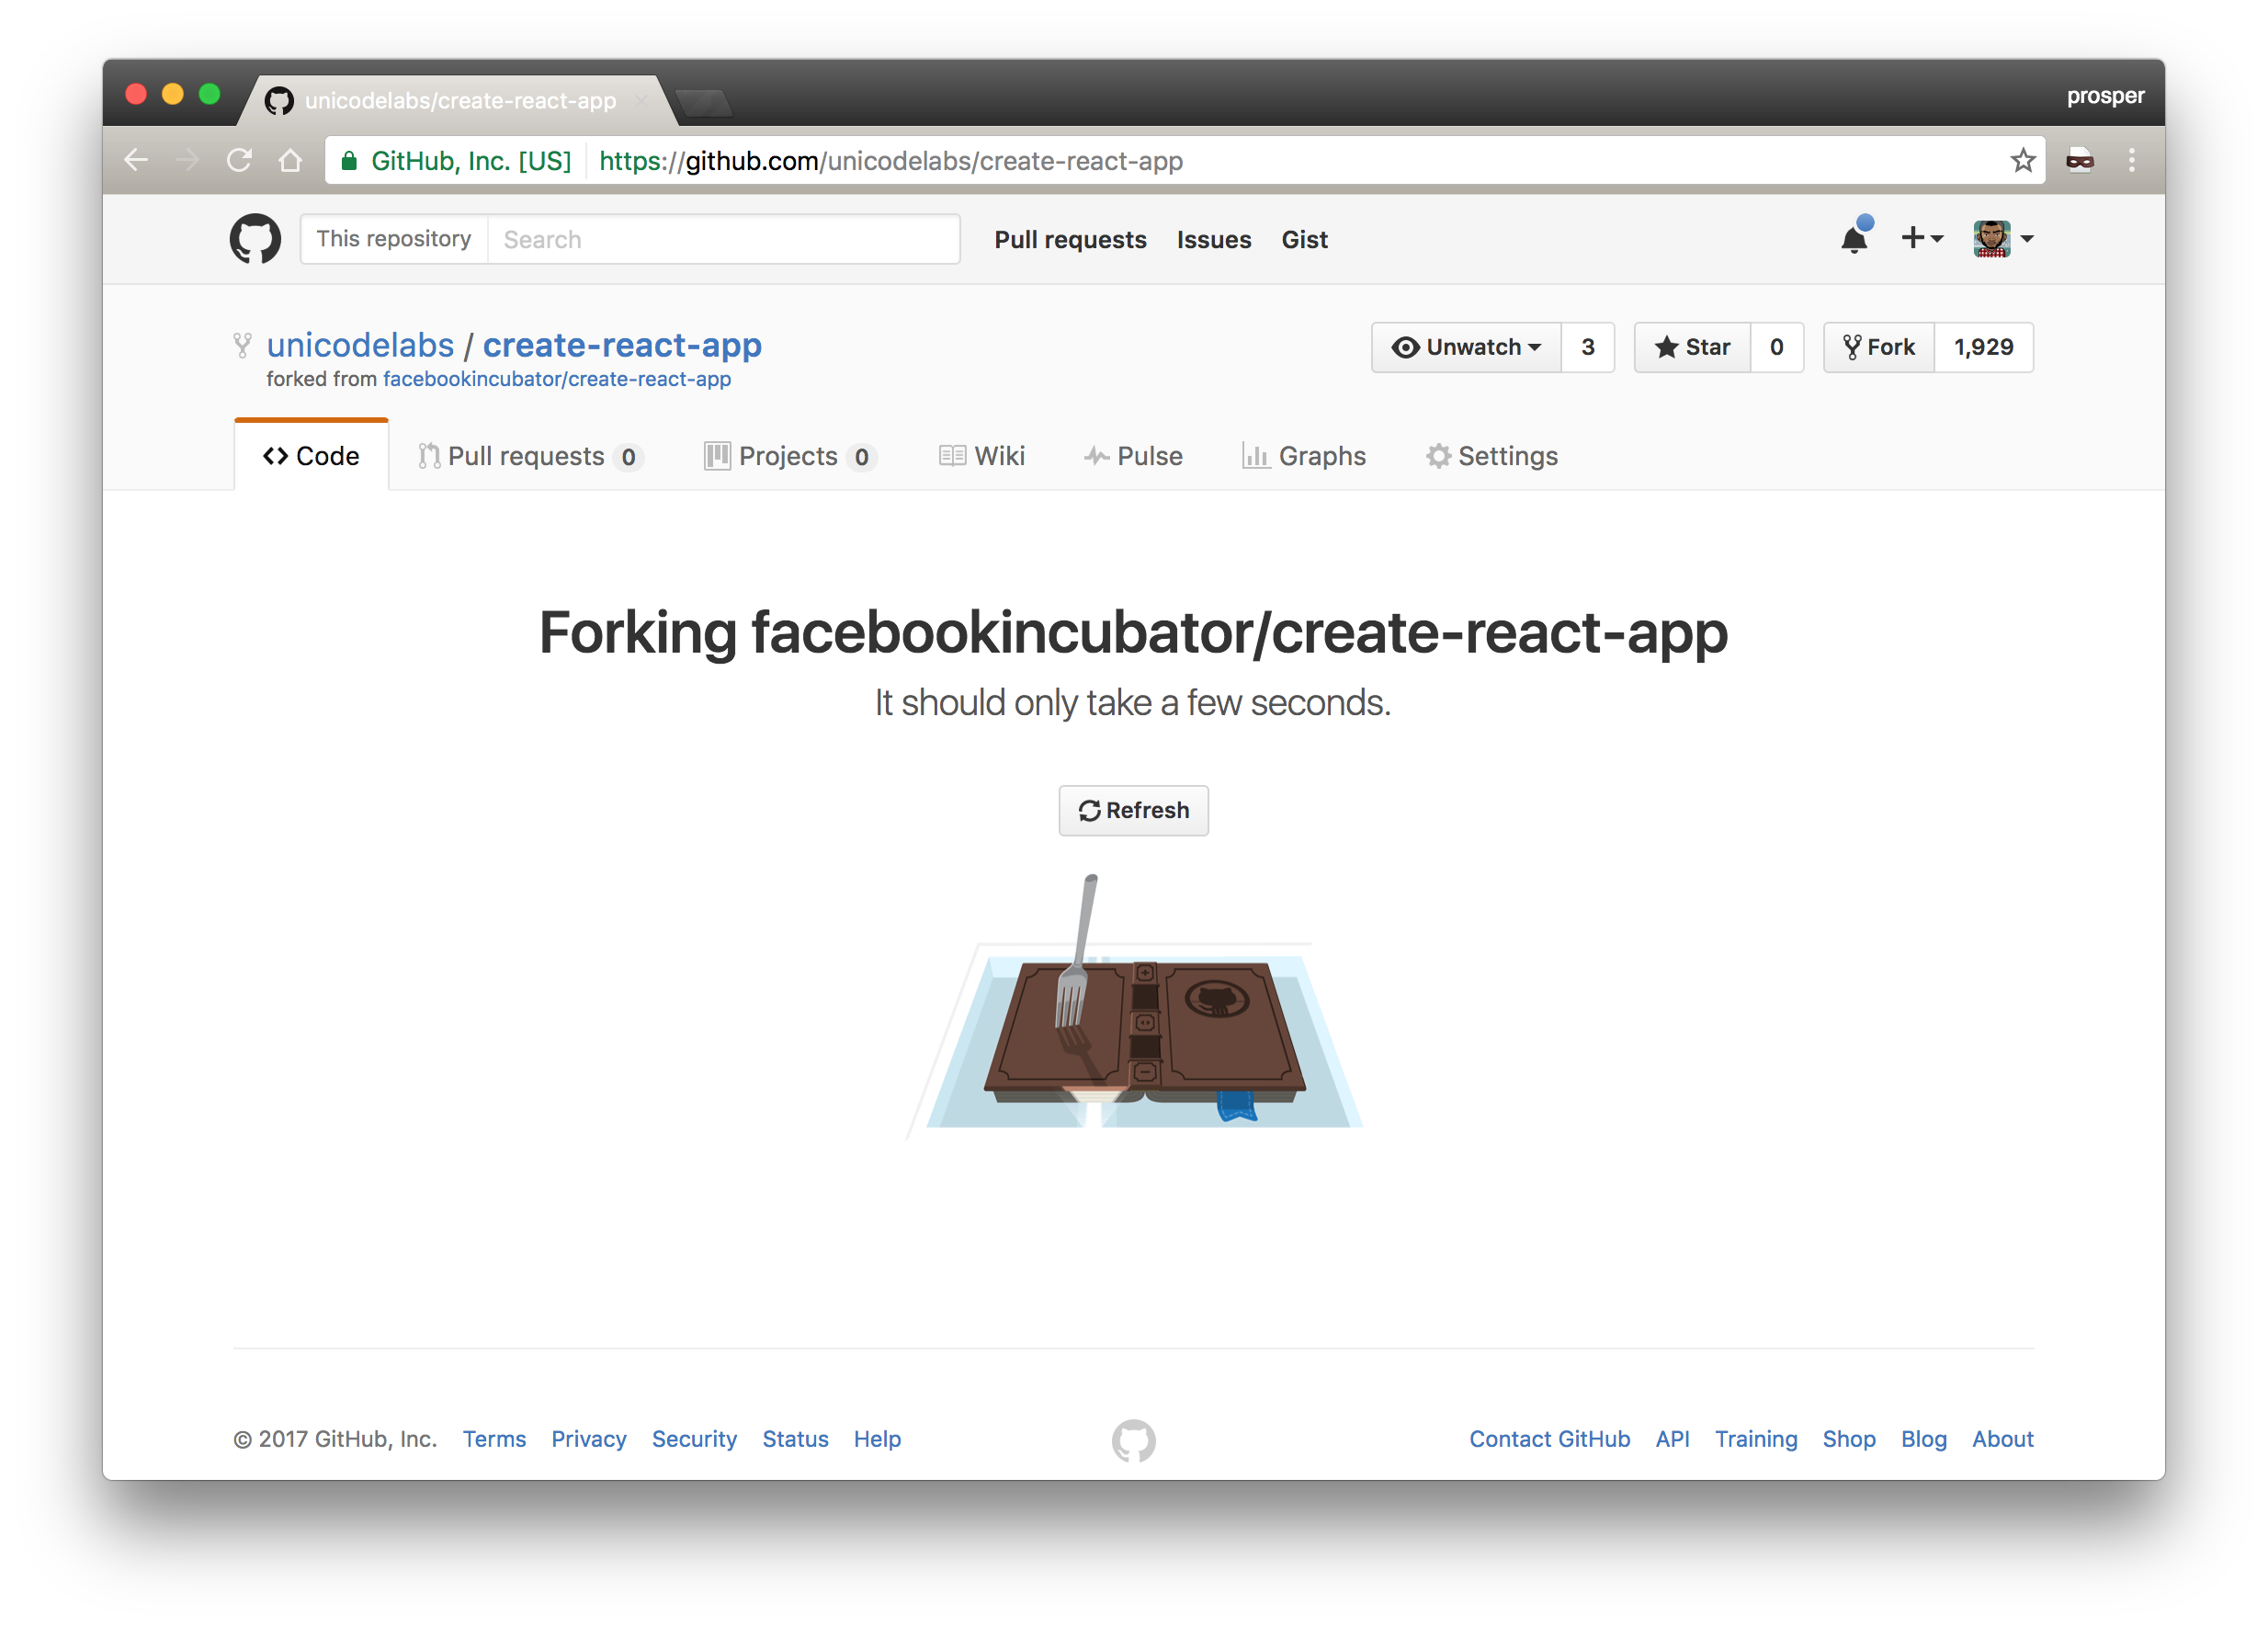 Creating a fork of create-react-app